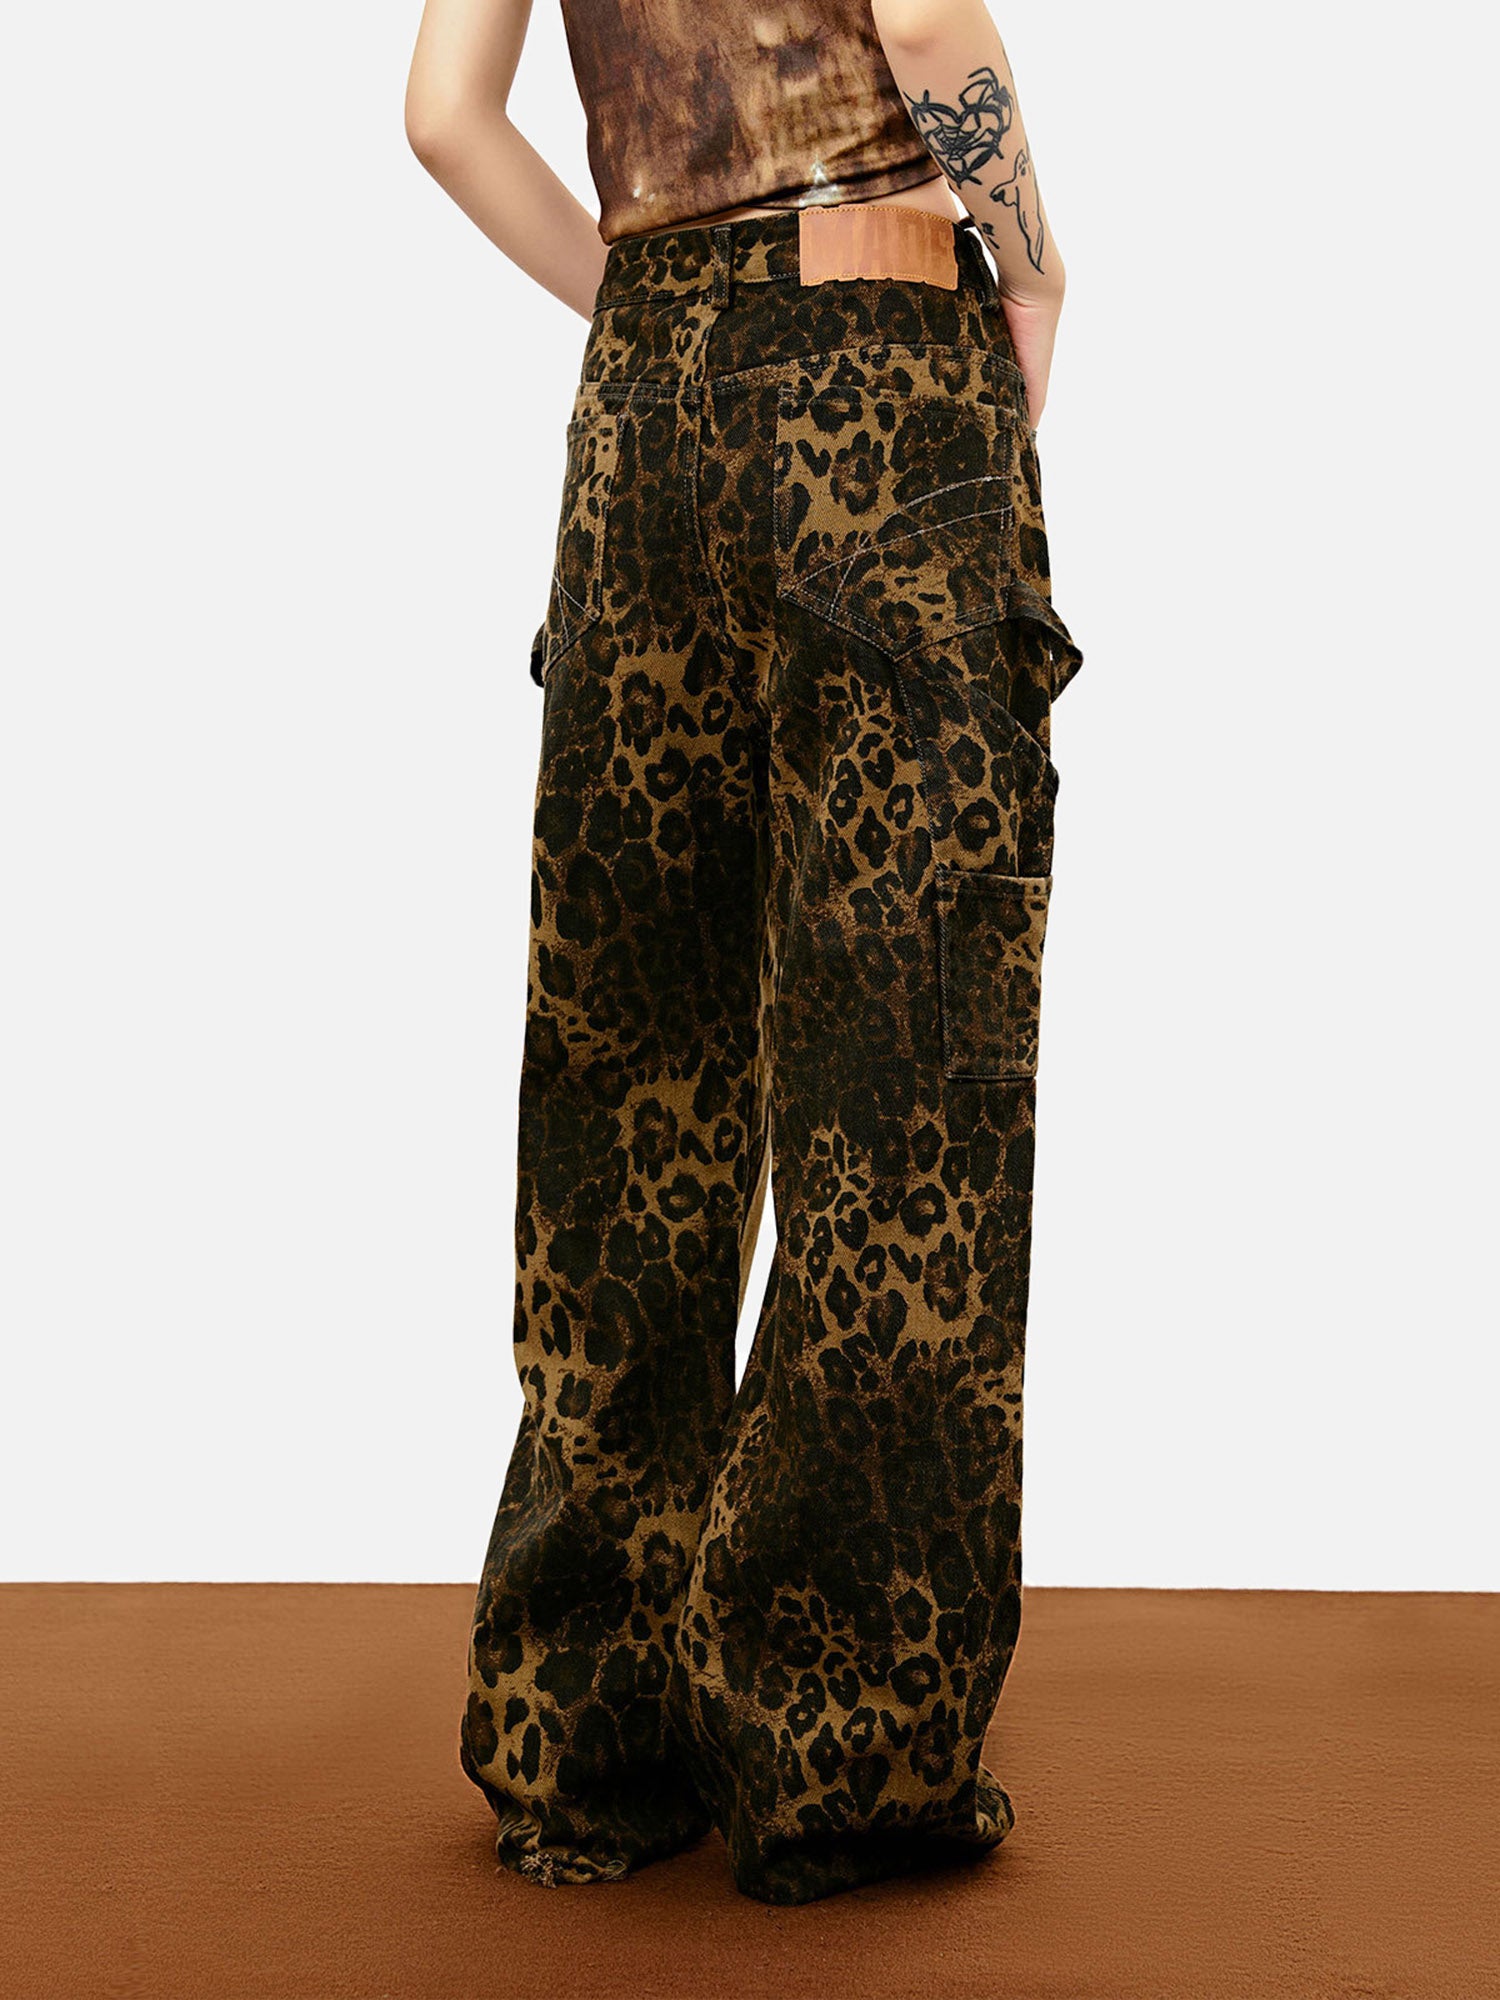 Thesupermade Patchwork Workwear Logging Straight-leg Leopard Print Casual Pants